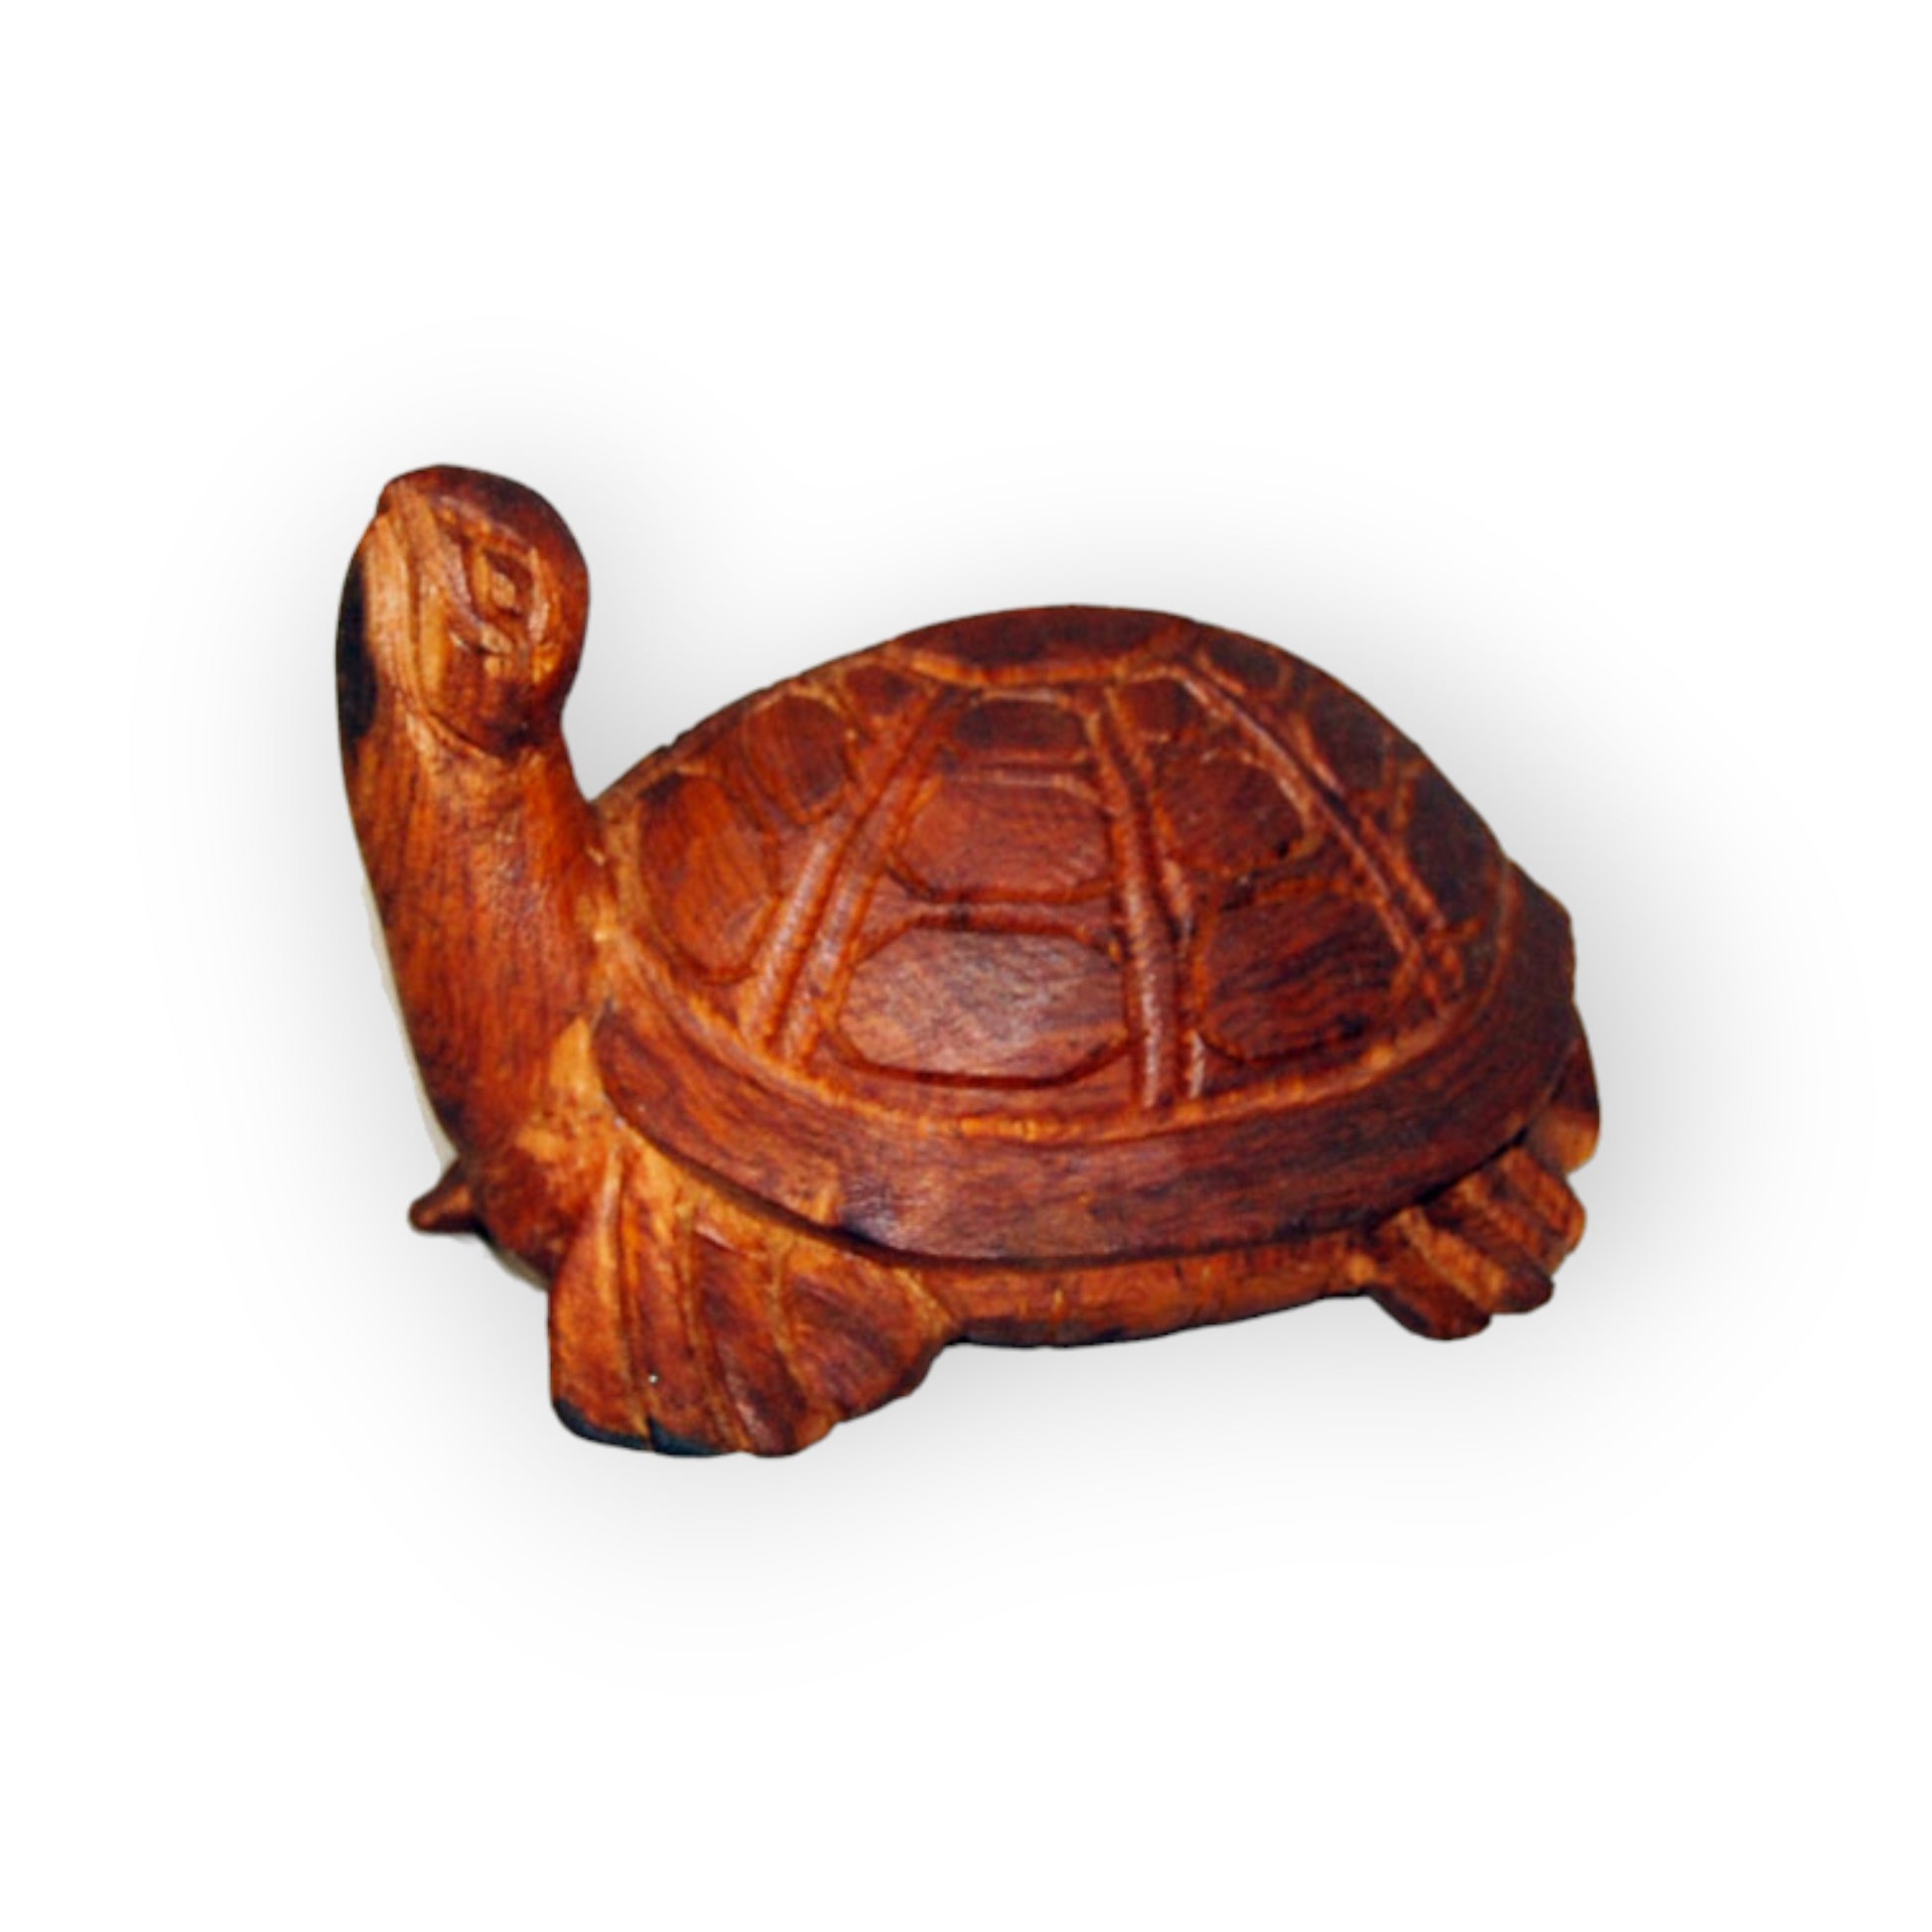 Carved Turtle from Teakwood with Head up